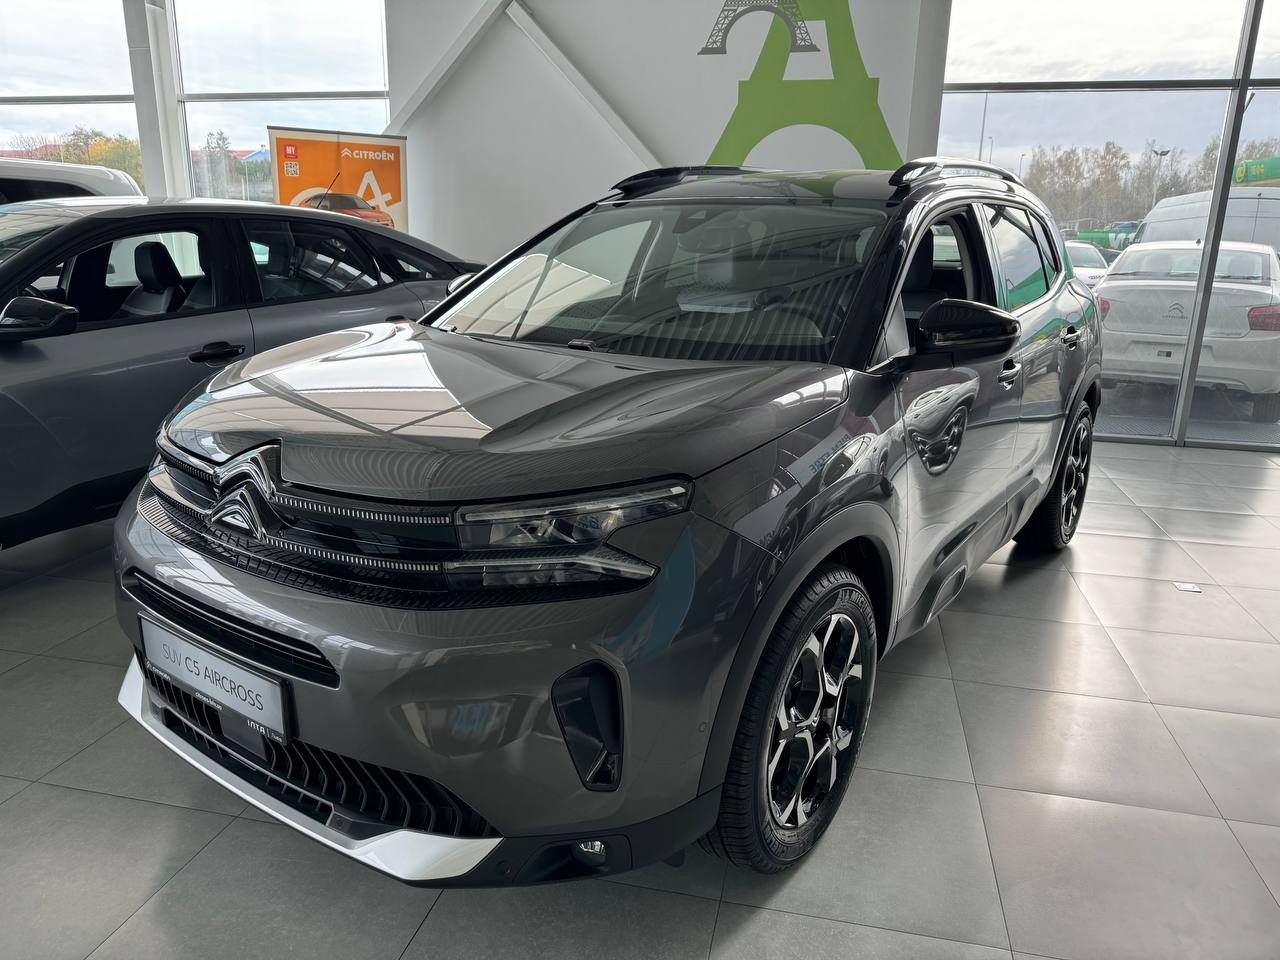 CITROЁN NEW C5 AIRCROSS BHDi 180 AT8 FEEL PACK (ЗНИЖКА 50 000 грн.)